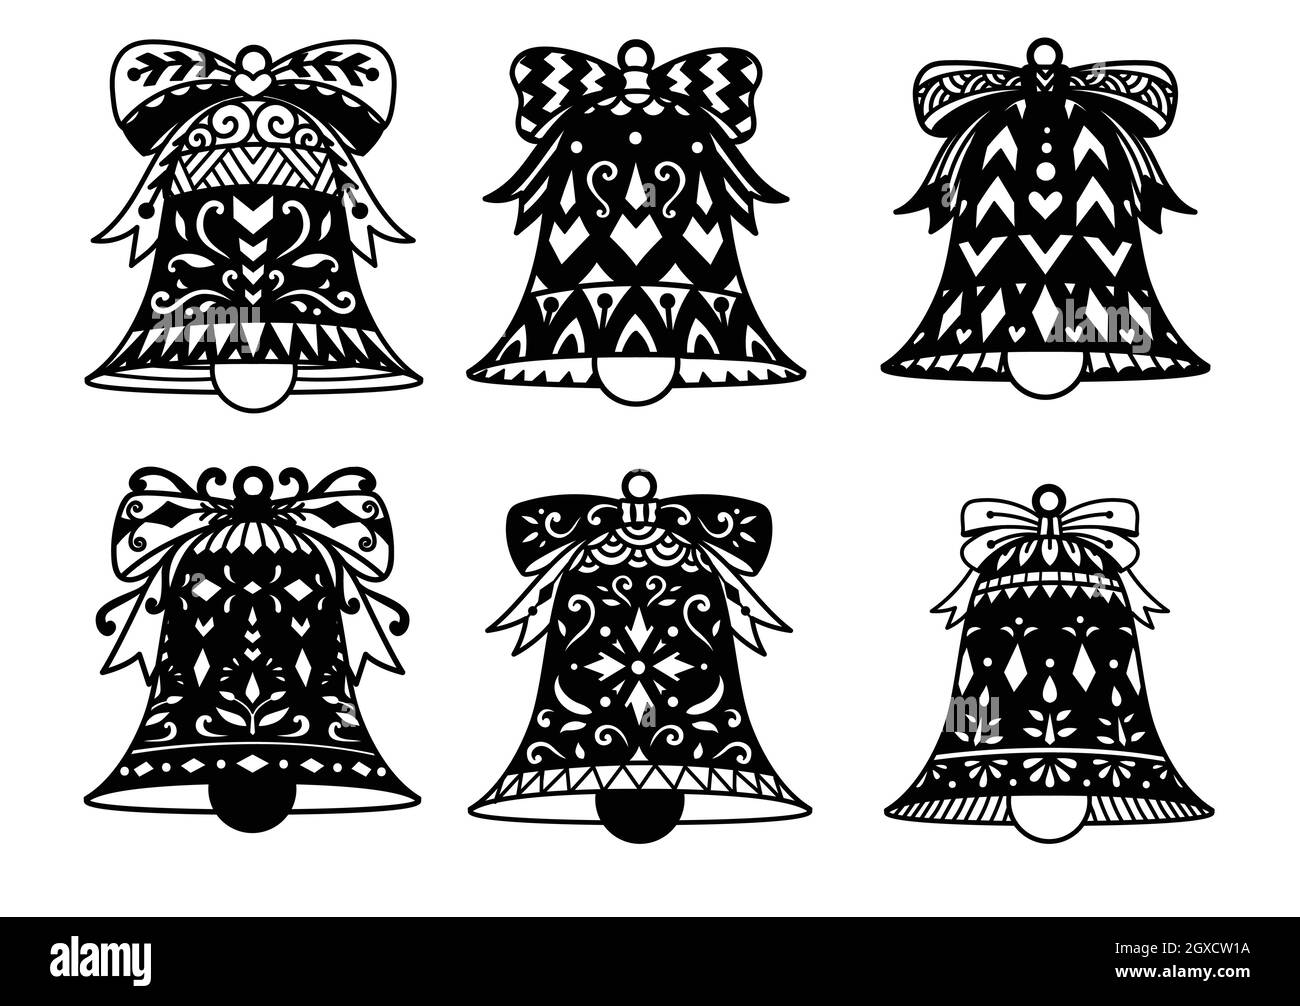 Six designs of Christmas bell for laser cutting,print on product,papler cutting, wood carving and so on. Vector illustrartion. Stock Vector